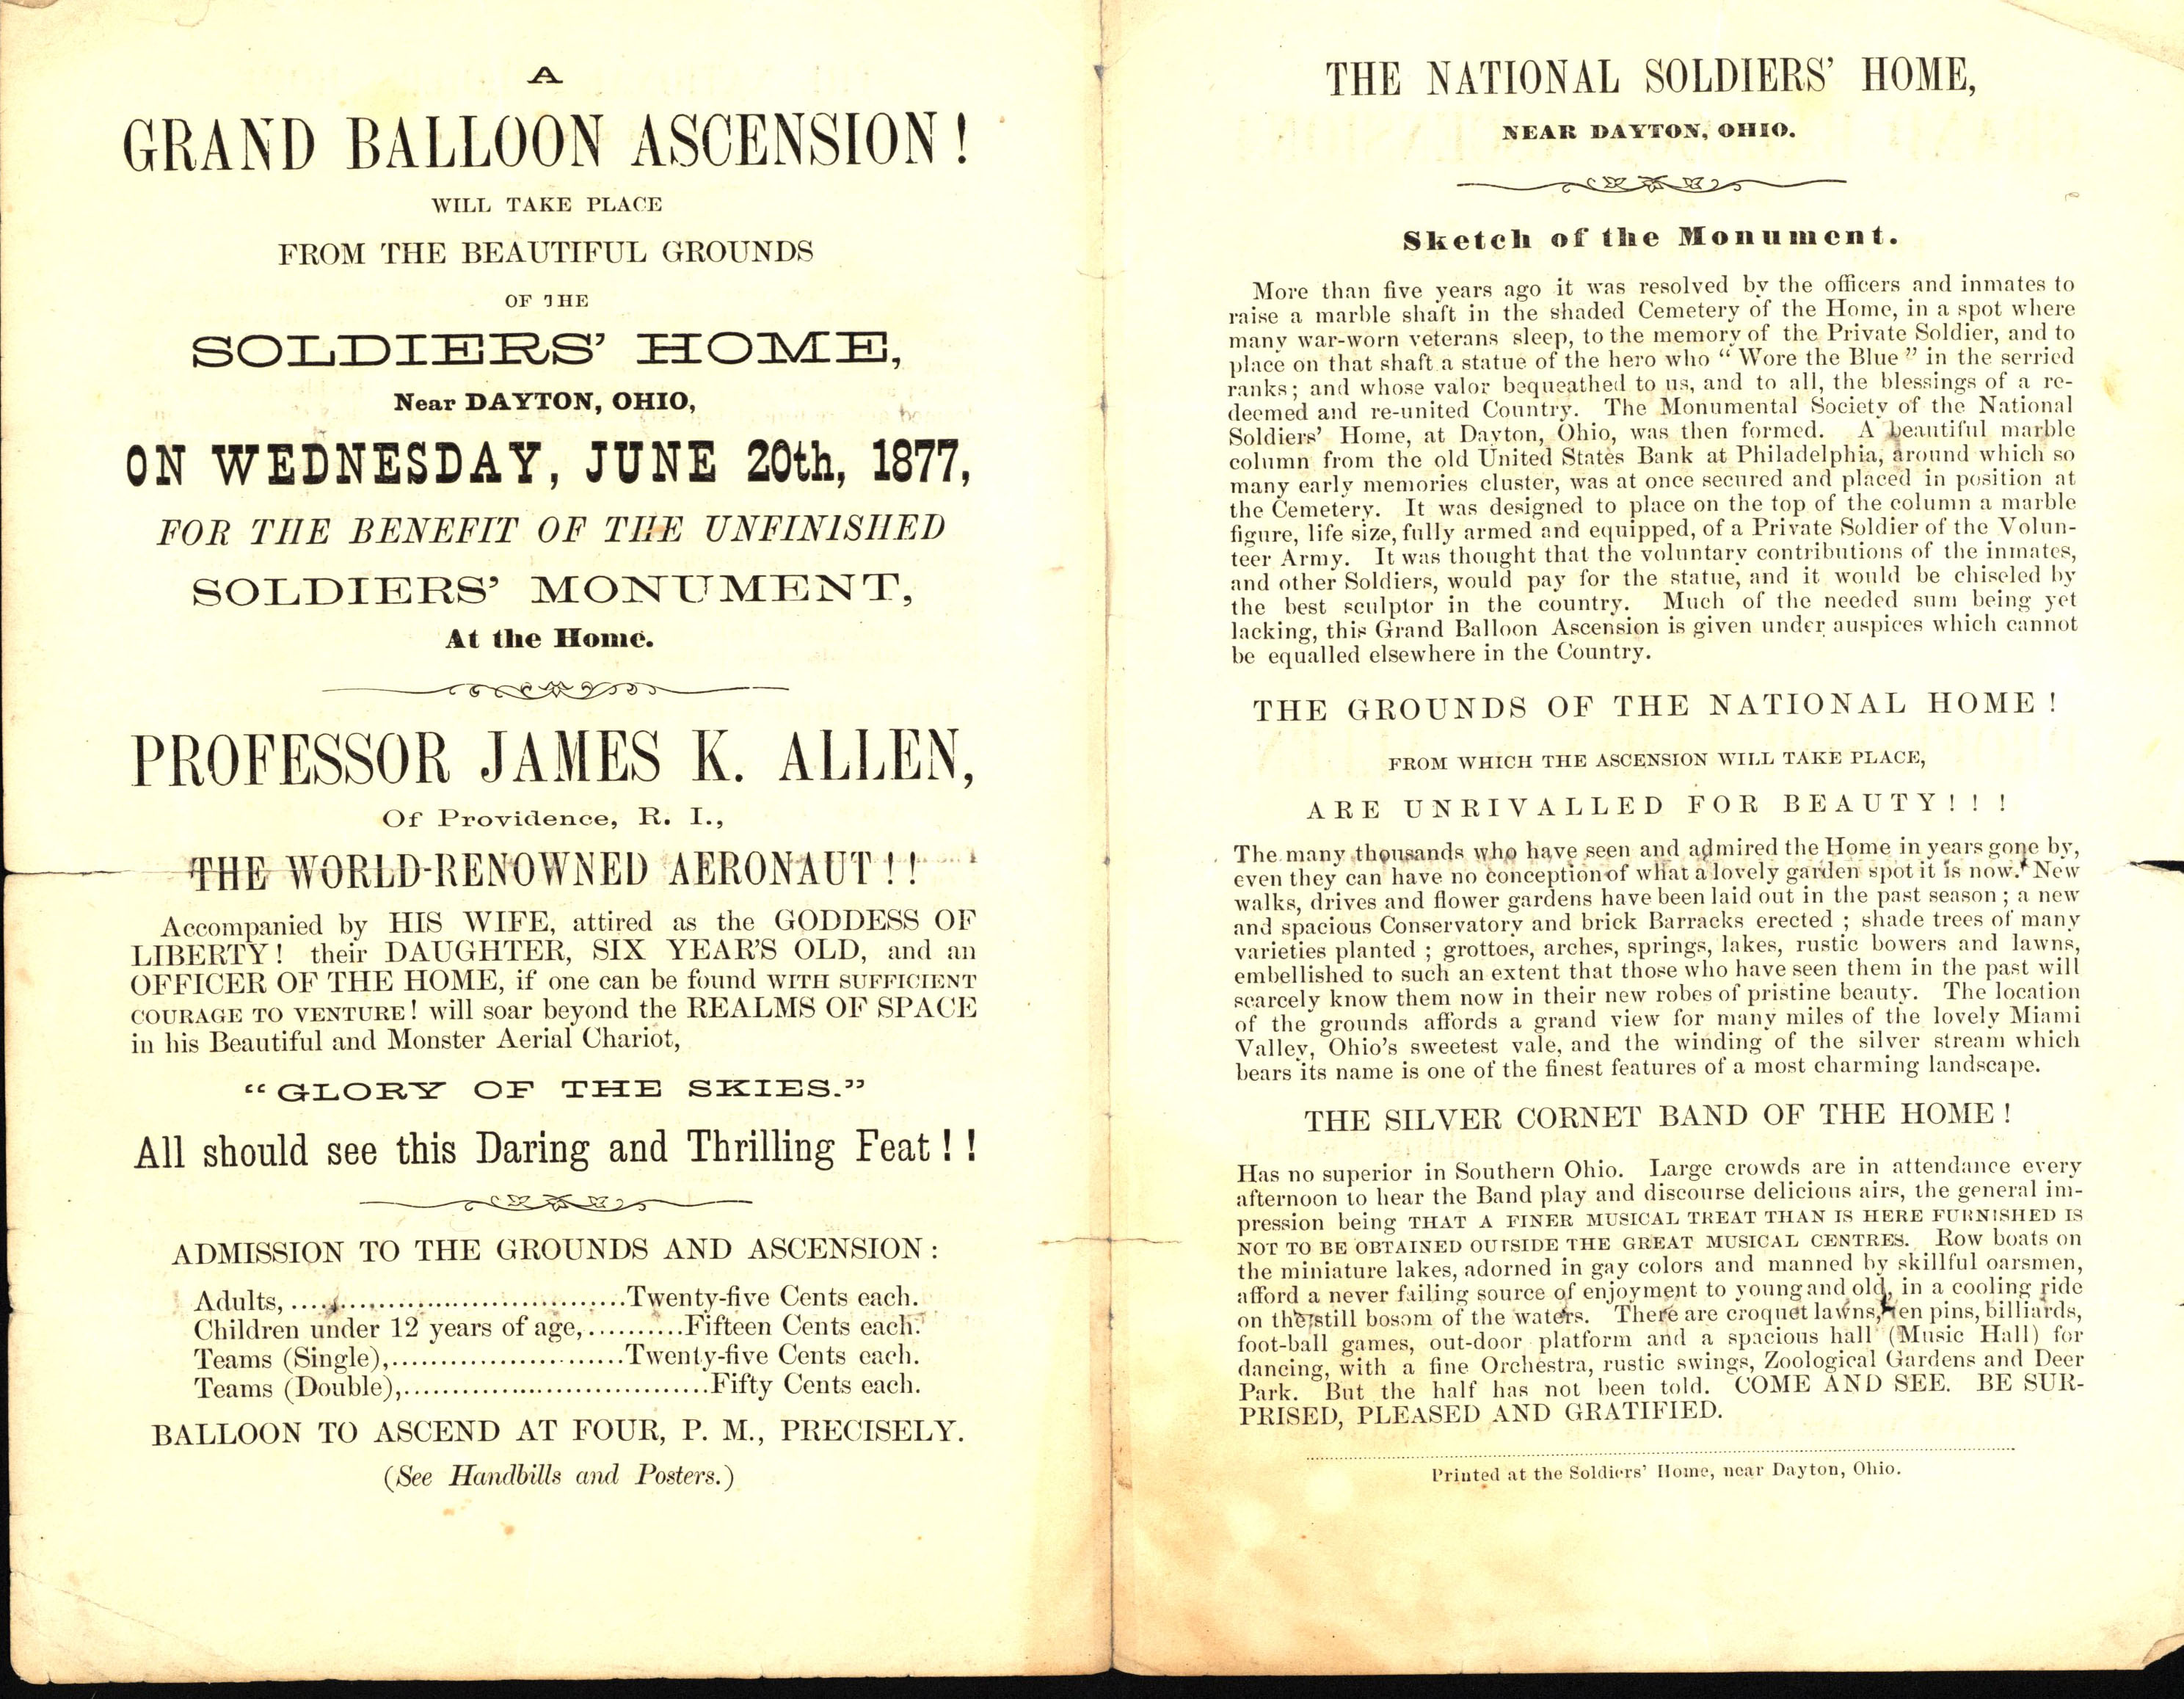 Advertisement from a balloon ascent at the Dayton Soldiers' Home, June 20, 1877